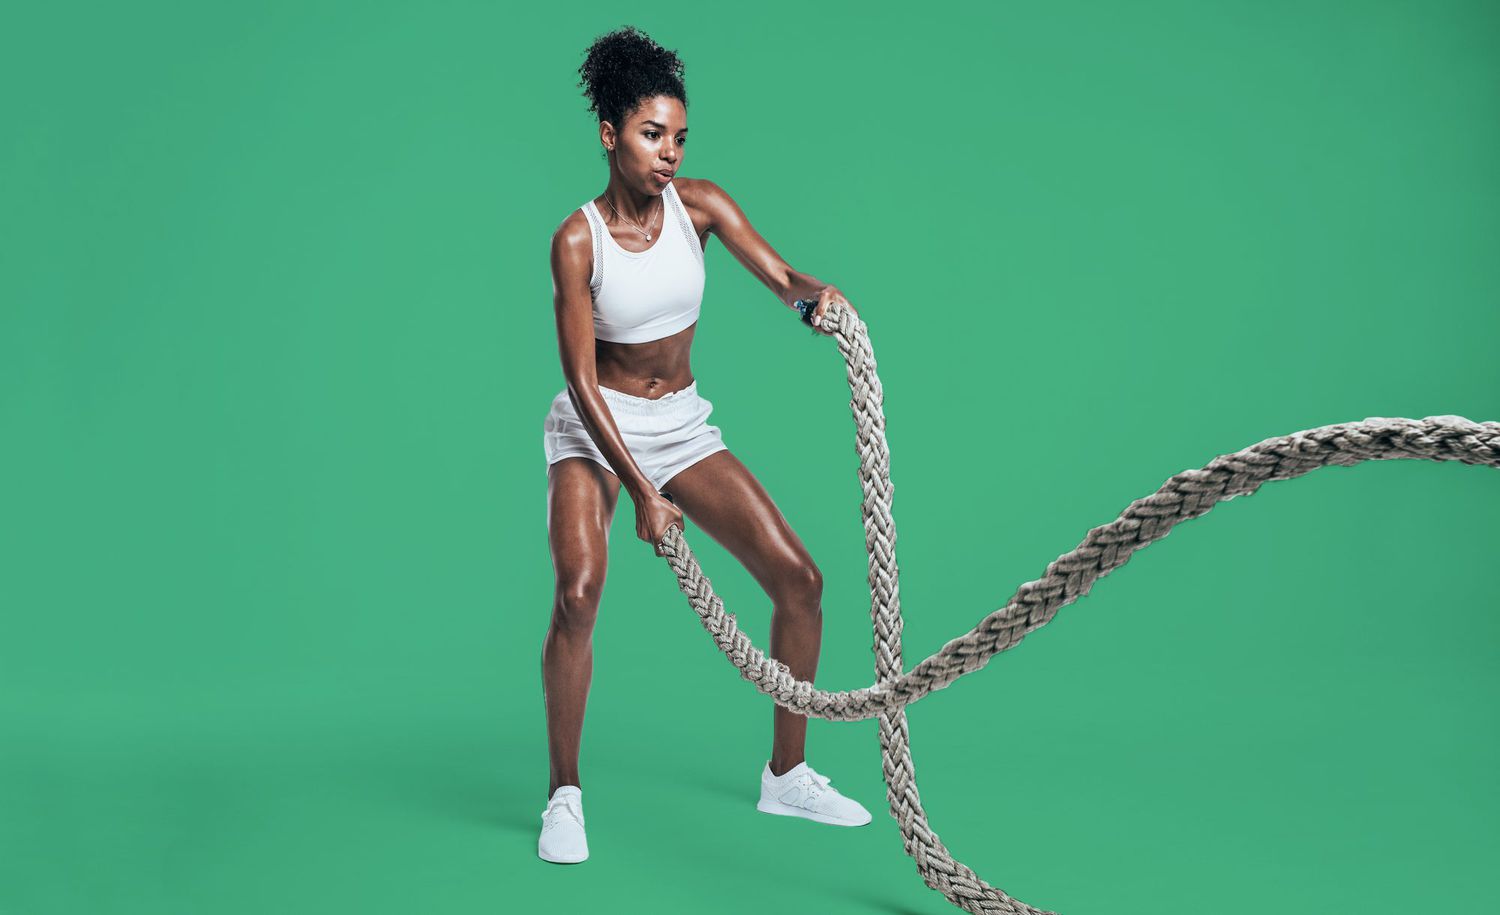 Athlete working out with battle ropes